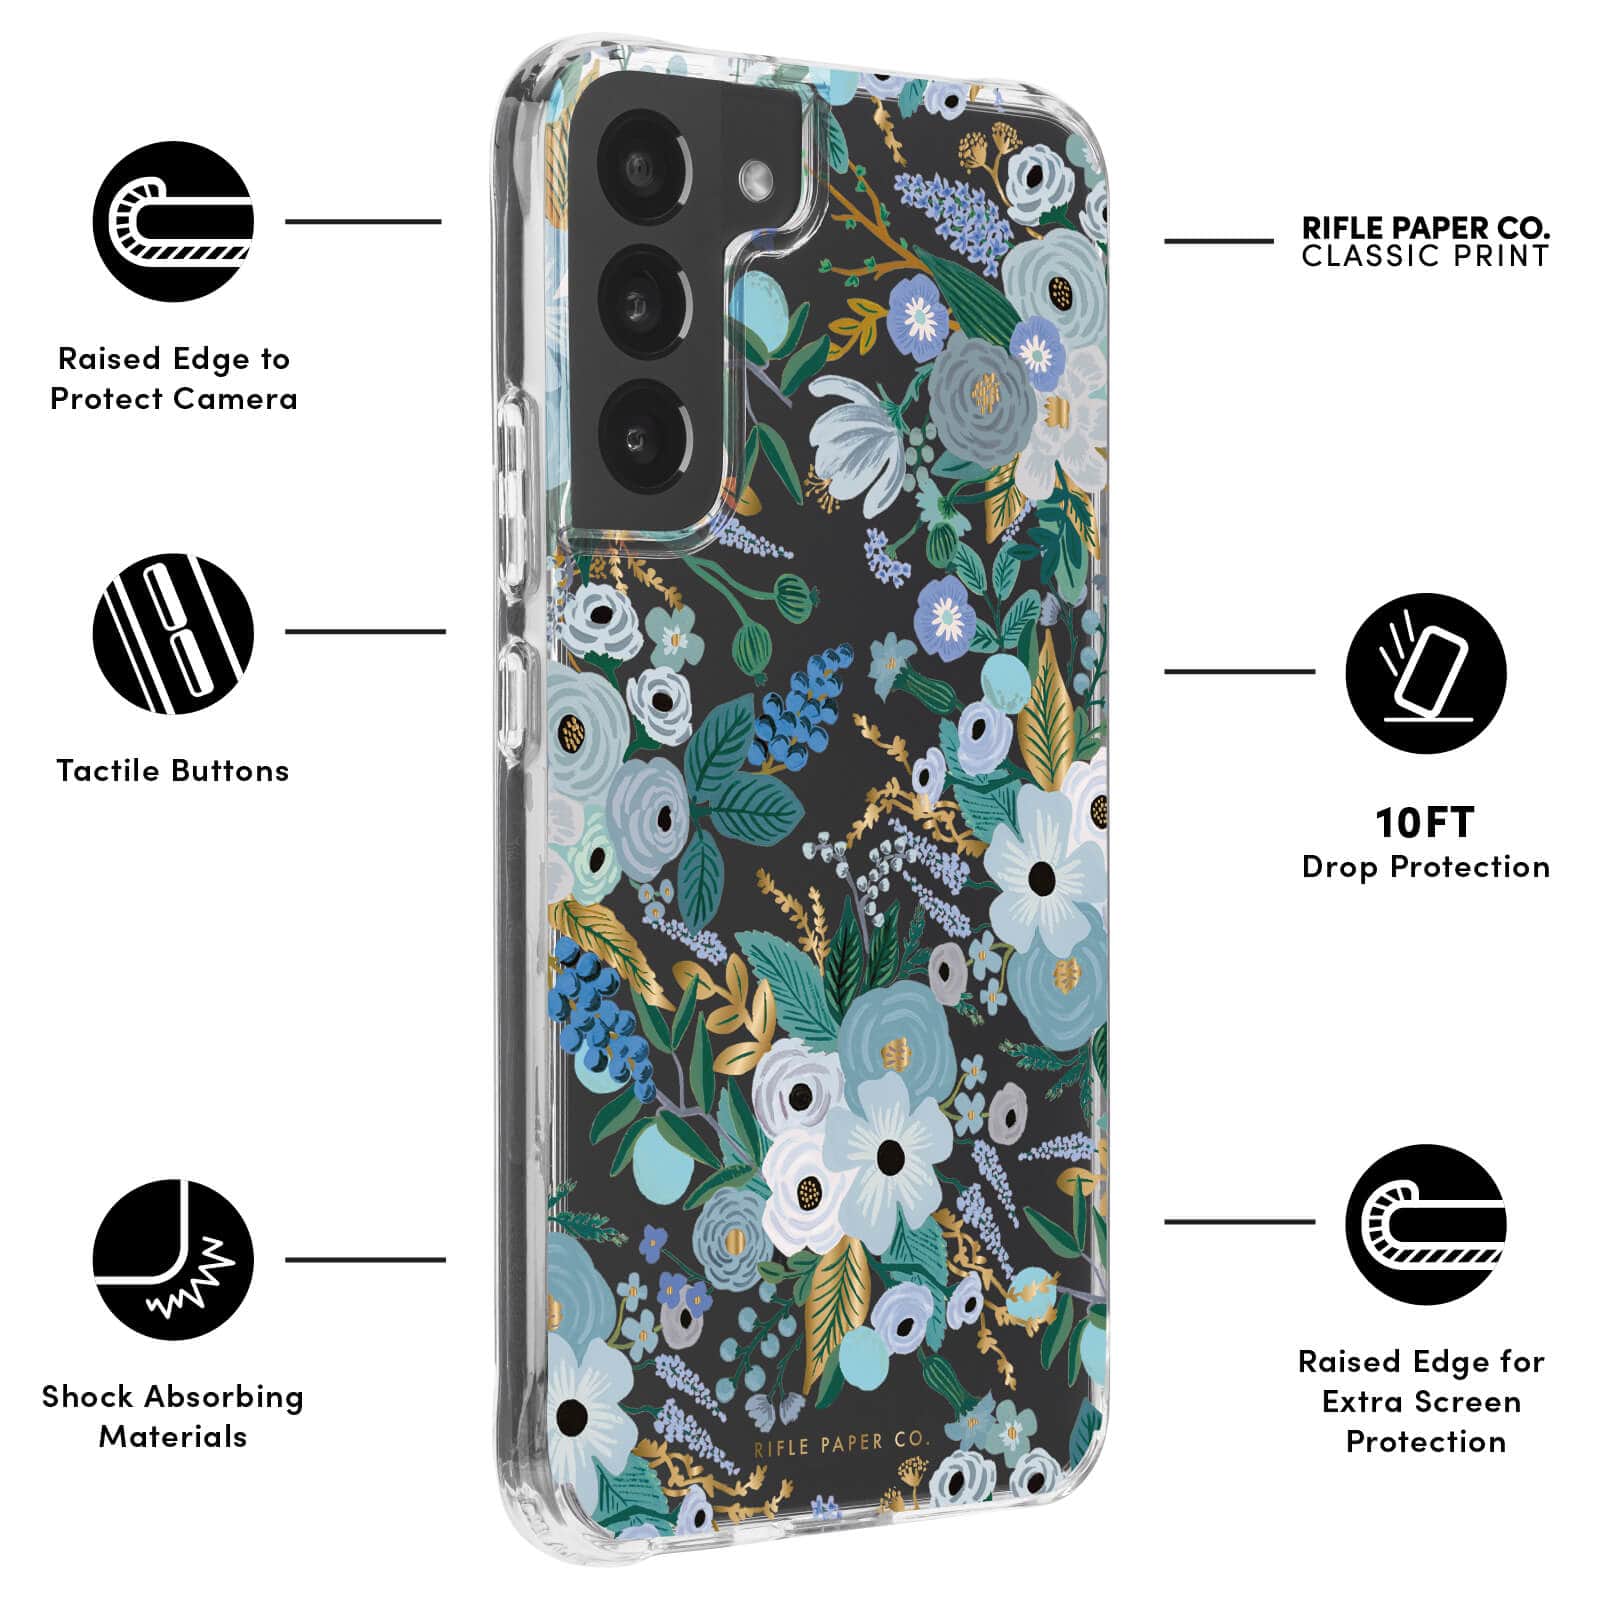 FEATURES: RAISED EDGE TO PROTECT CAMERA, TACTILE BUTTONS, SHOCK ABSORBING MATERIALS, RIFLE PAPER CO. CLASSIC PRINT, 10FT DROP PROTECTION, RAISED EDGE FOR EXTRA SCREEN PROTECTION. COLOR::GARDEN PARTY BLUE